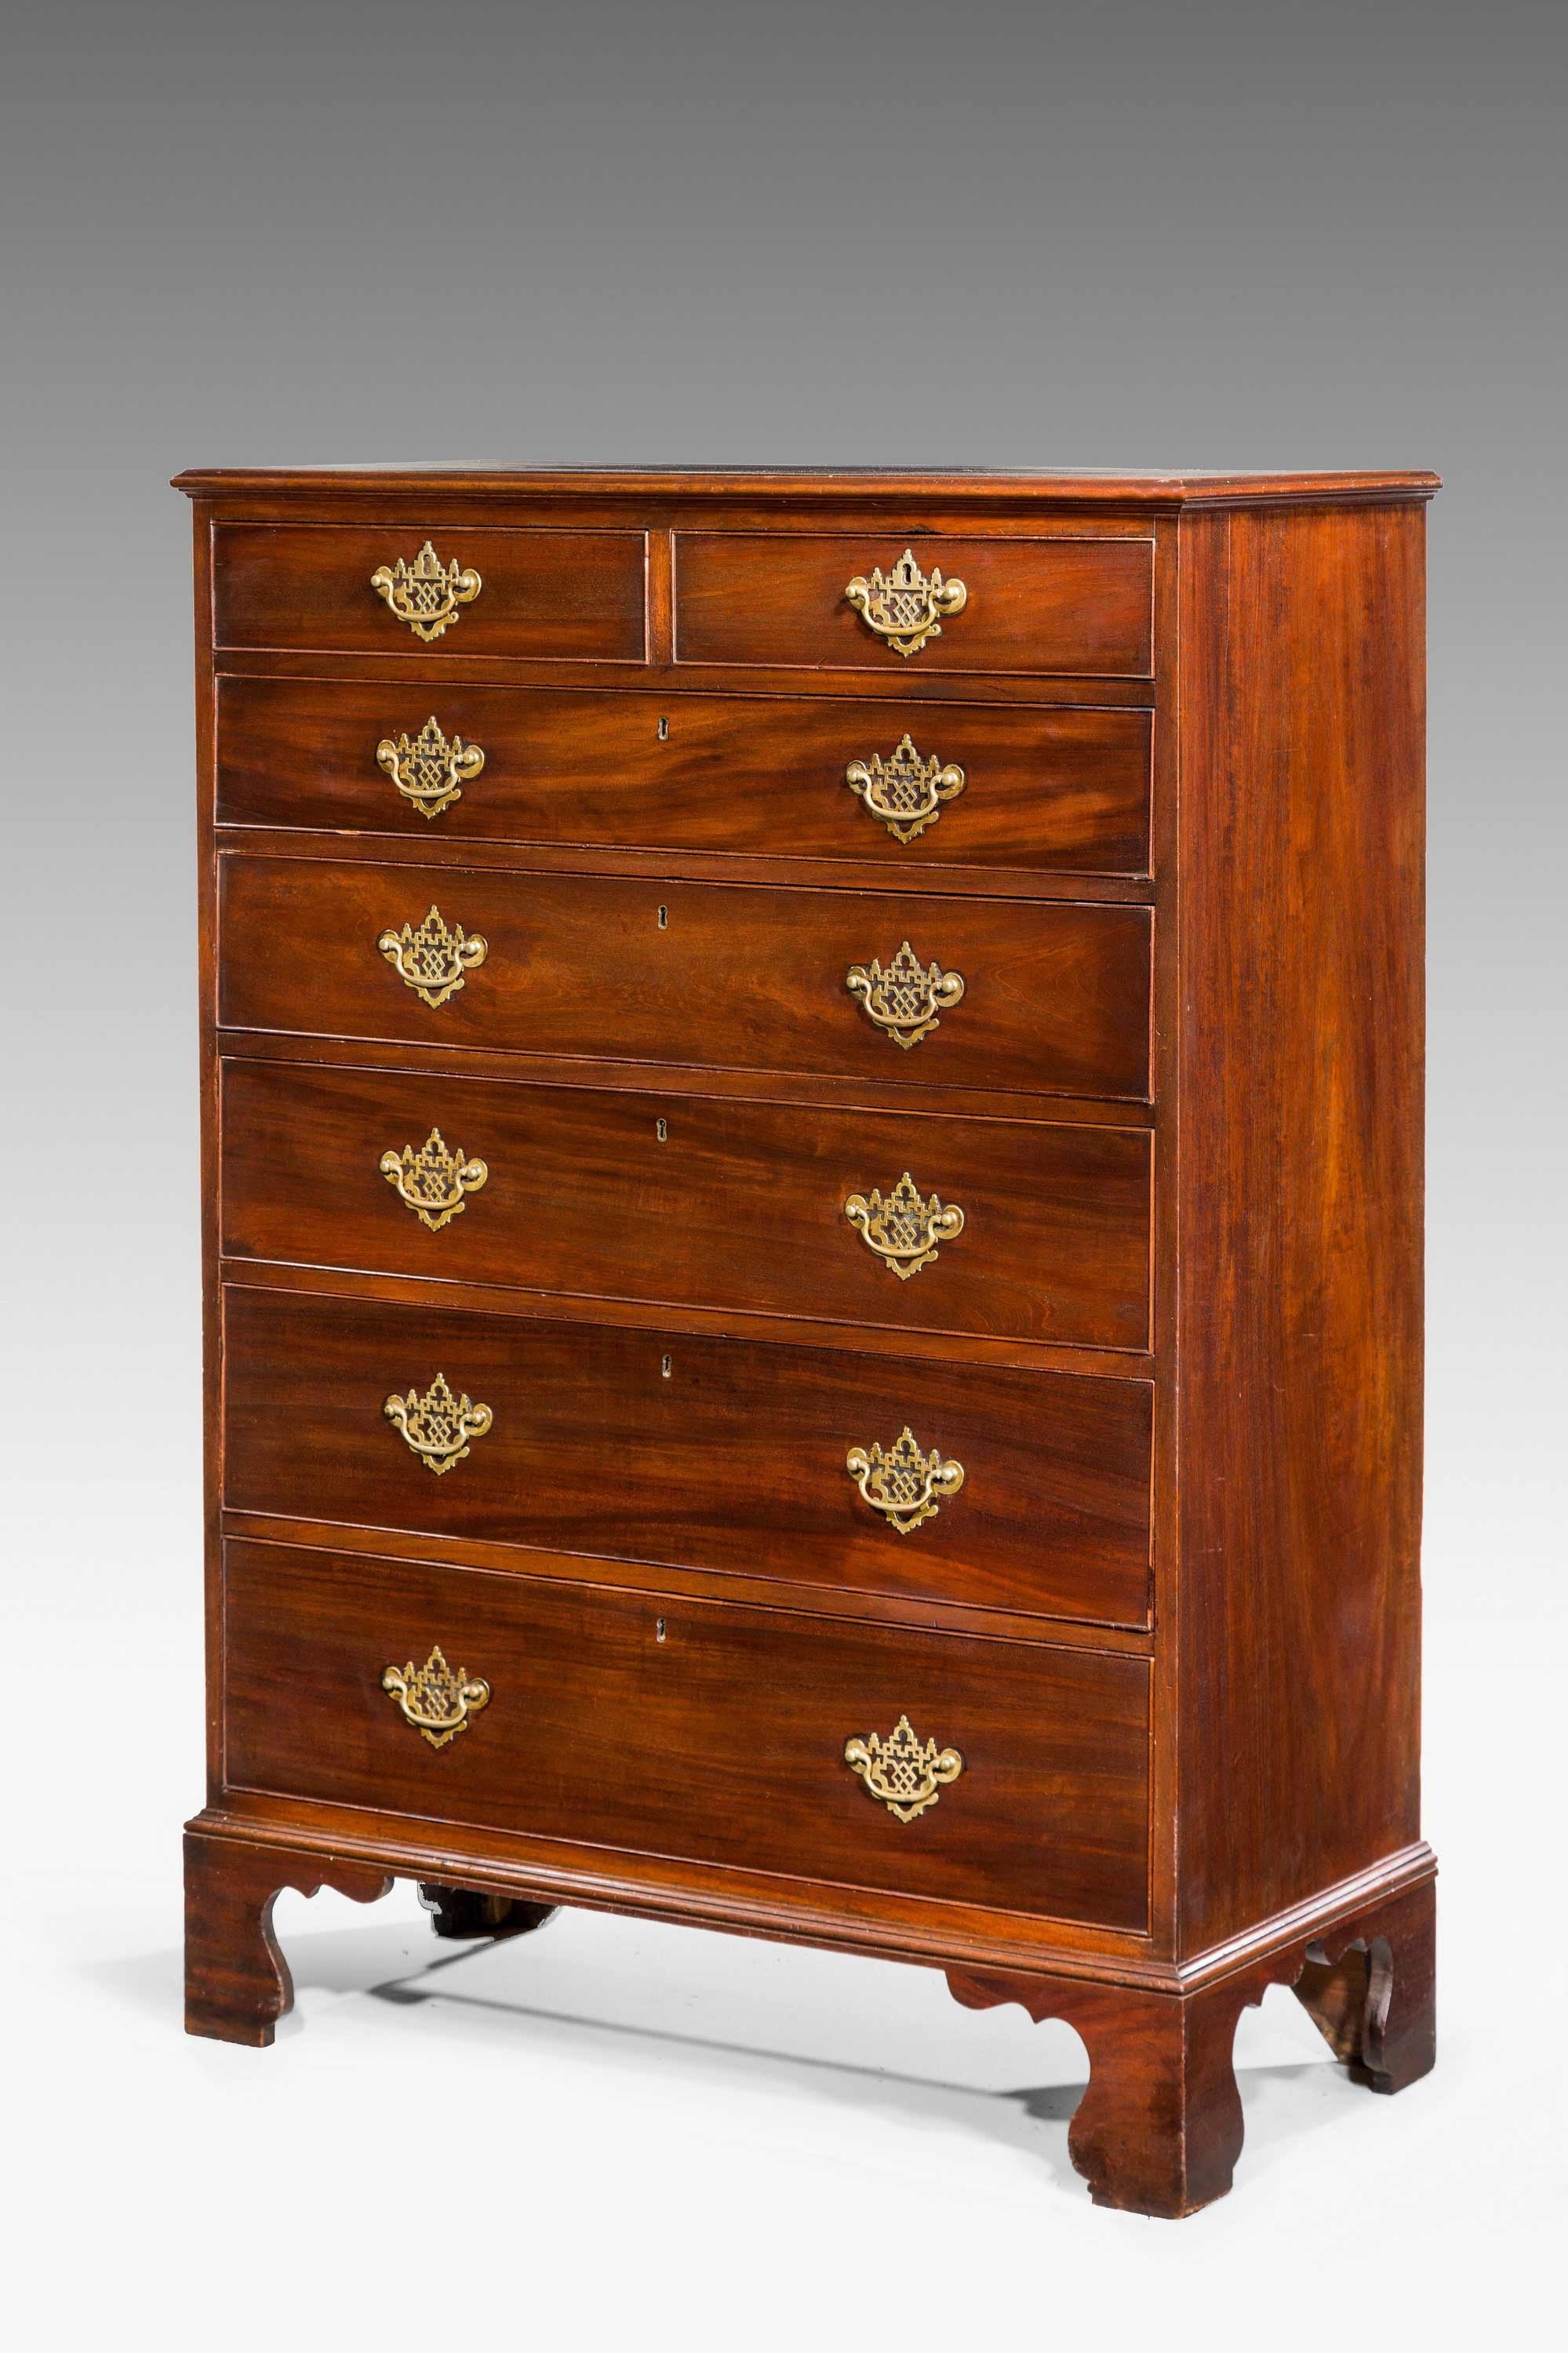 George III Period Mahogany Chest of Drawers